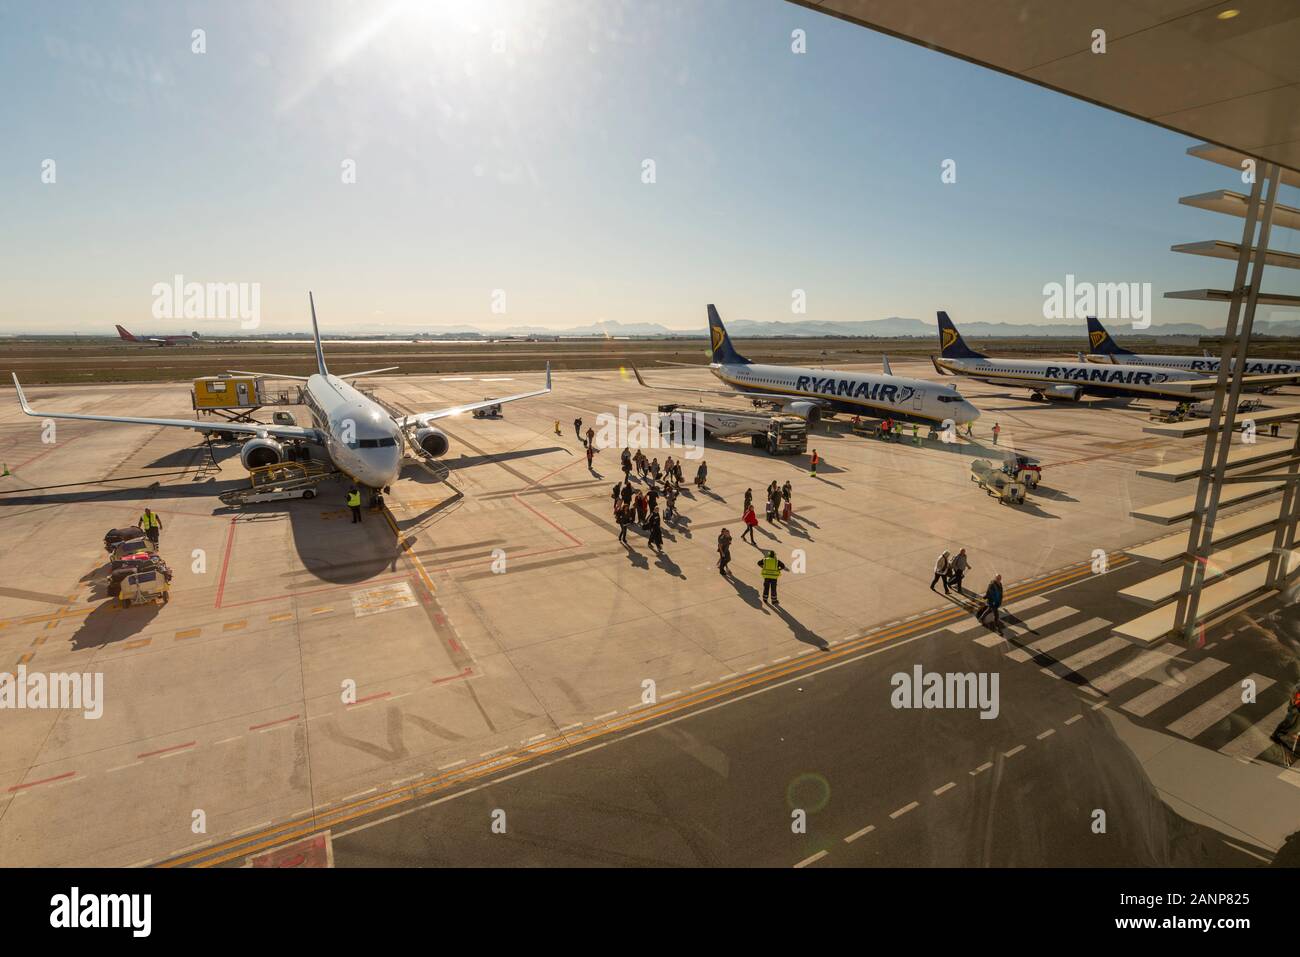 Region de Murcia International Airport, Corvera, Costa Calida, Spain, Europe. Busy with easyJet and Ryanair jet airliner planes. Passengers exiting Stock Photo